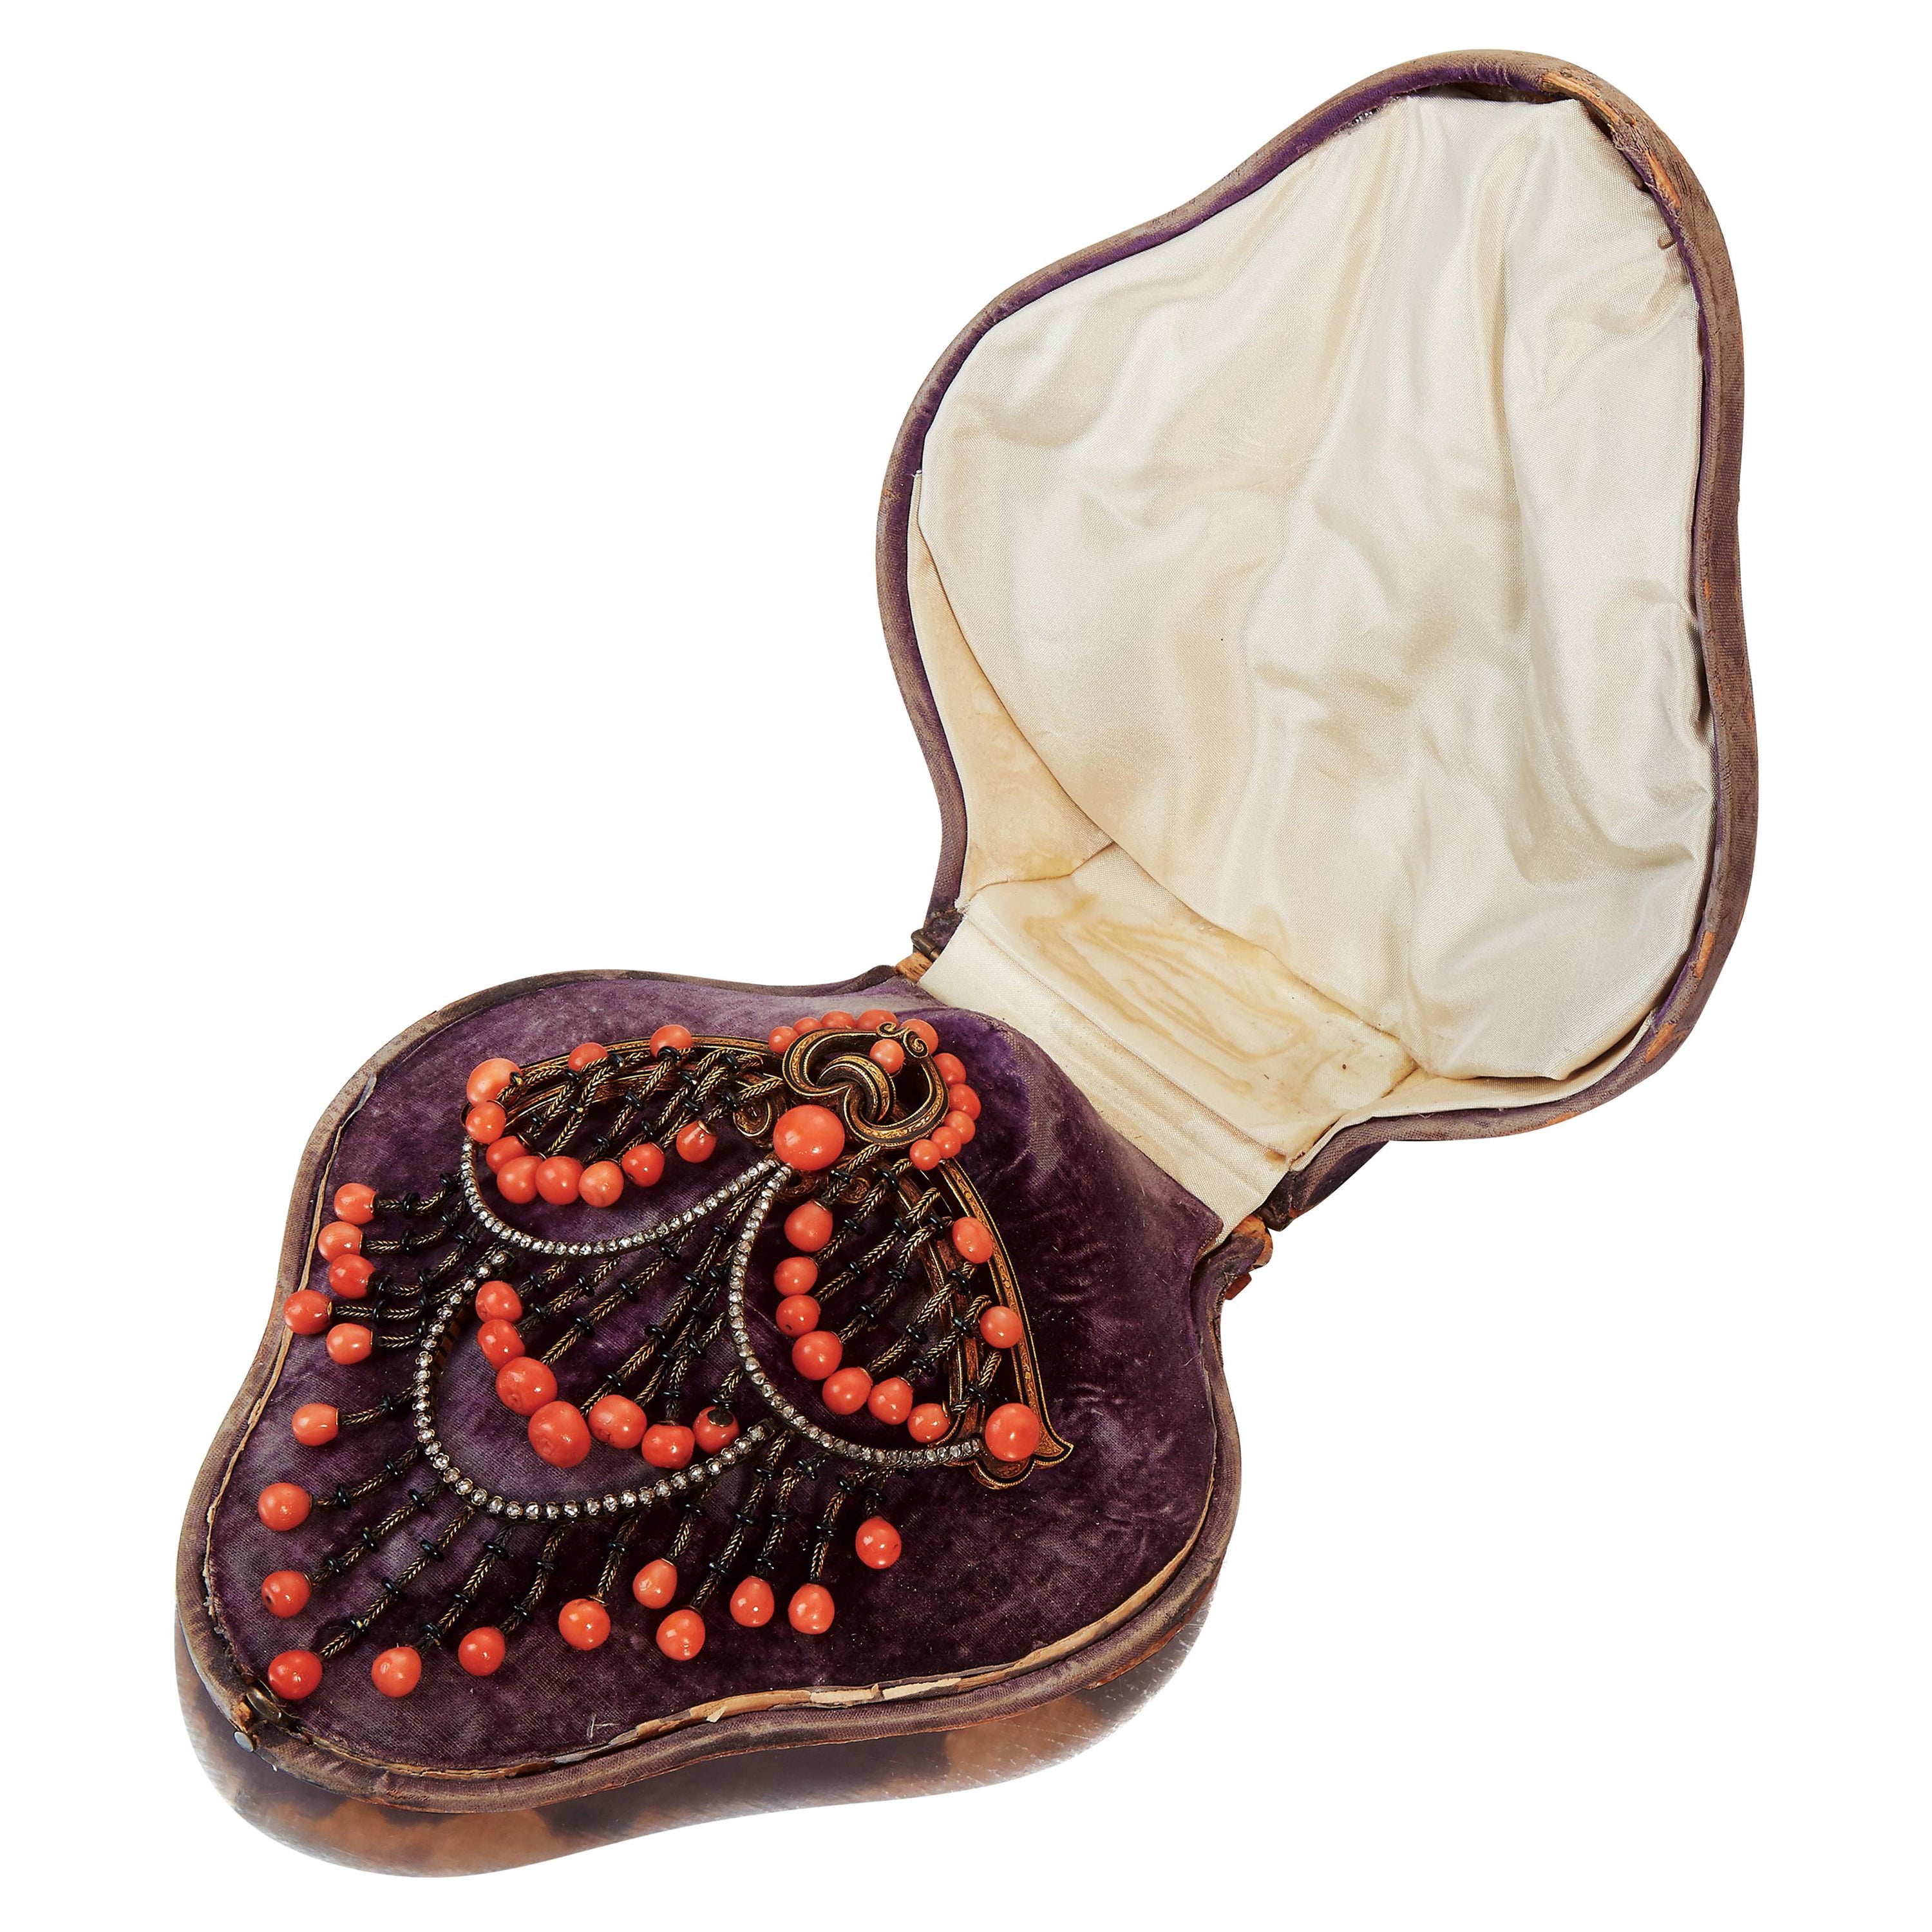 Victorian Coral Stomacher Brooch with Fitted Box